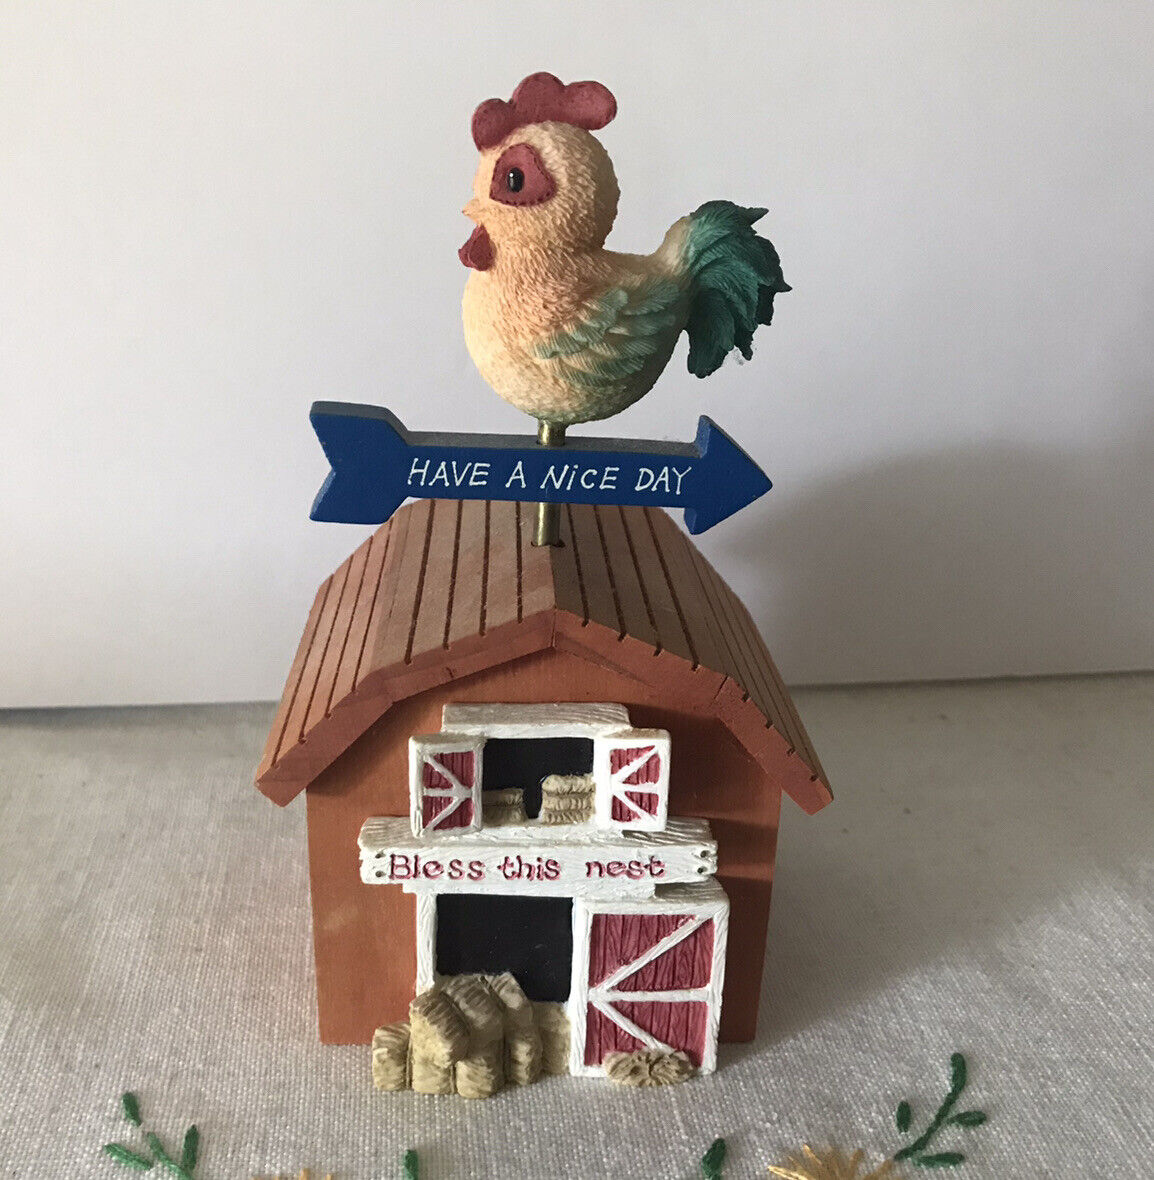 VTG Enesco Musical Barn Rotating Rooster On Roof-Plays “Old McDonald Had A Farm”